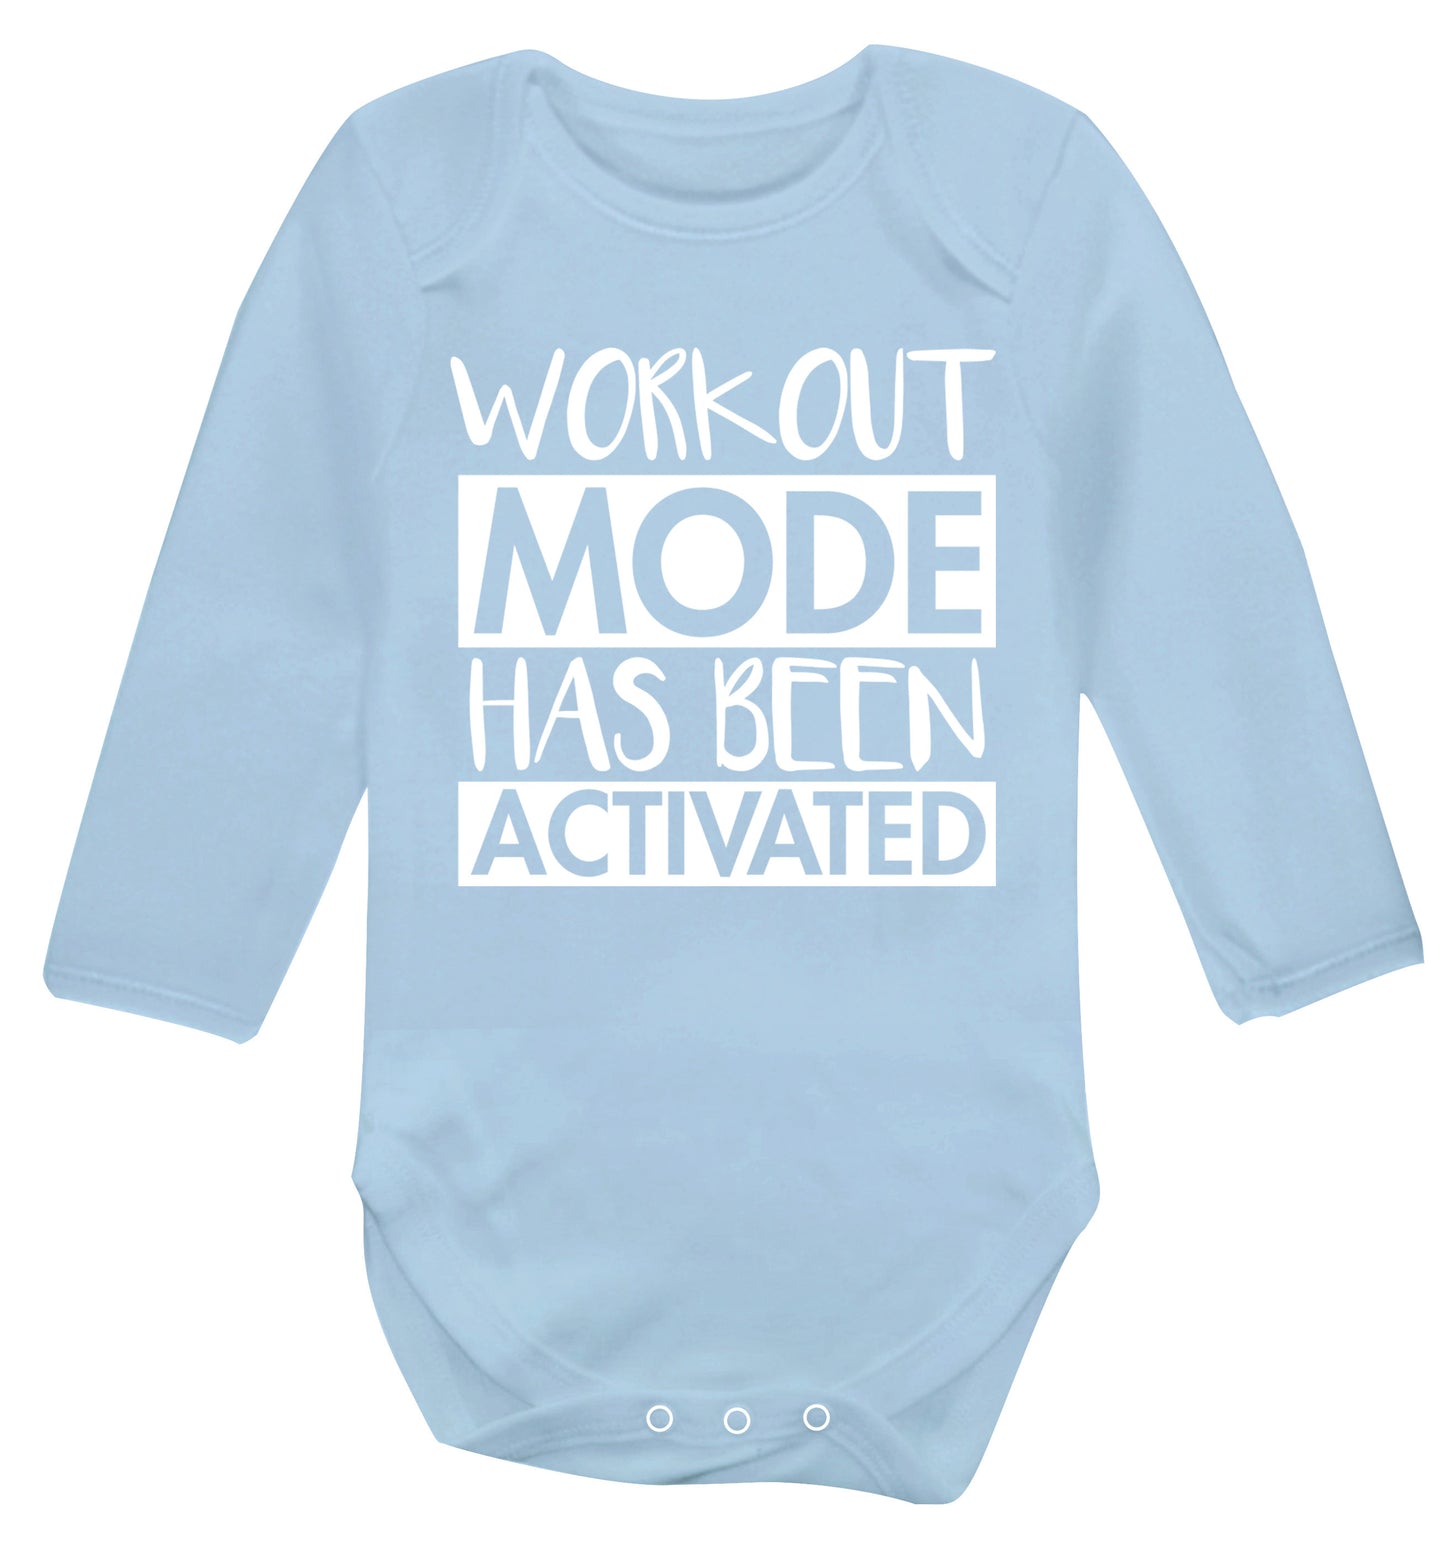 Workout mode has been activated Baby Vest long sleeved pale blue 6-12 months